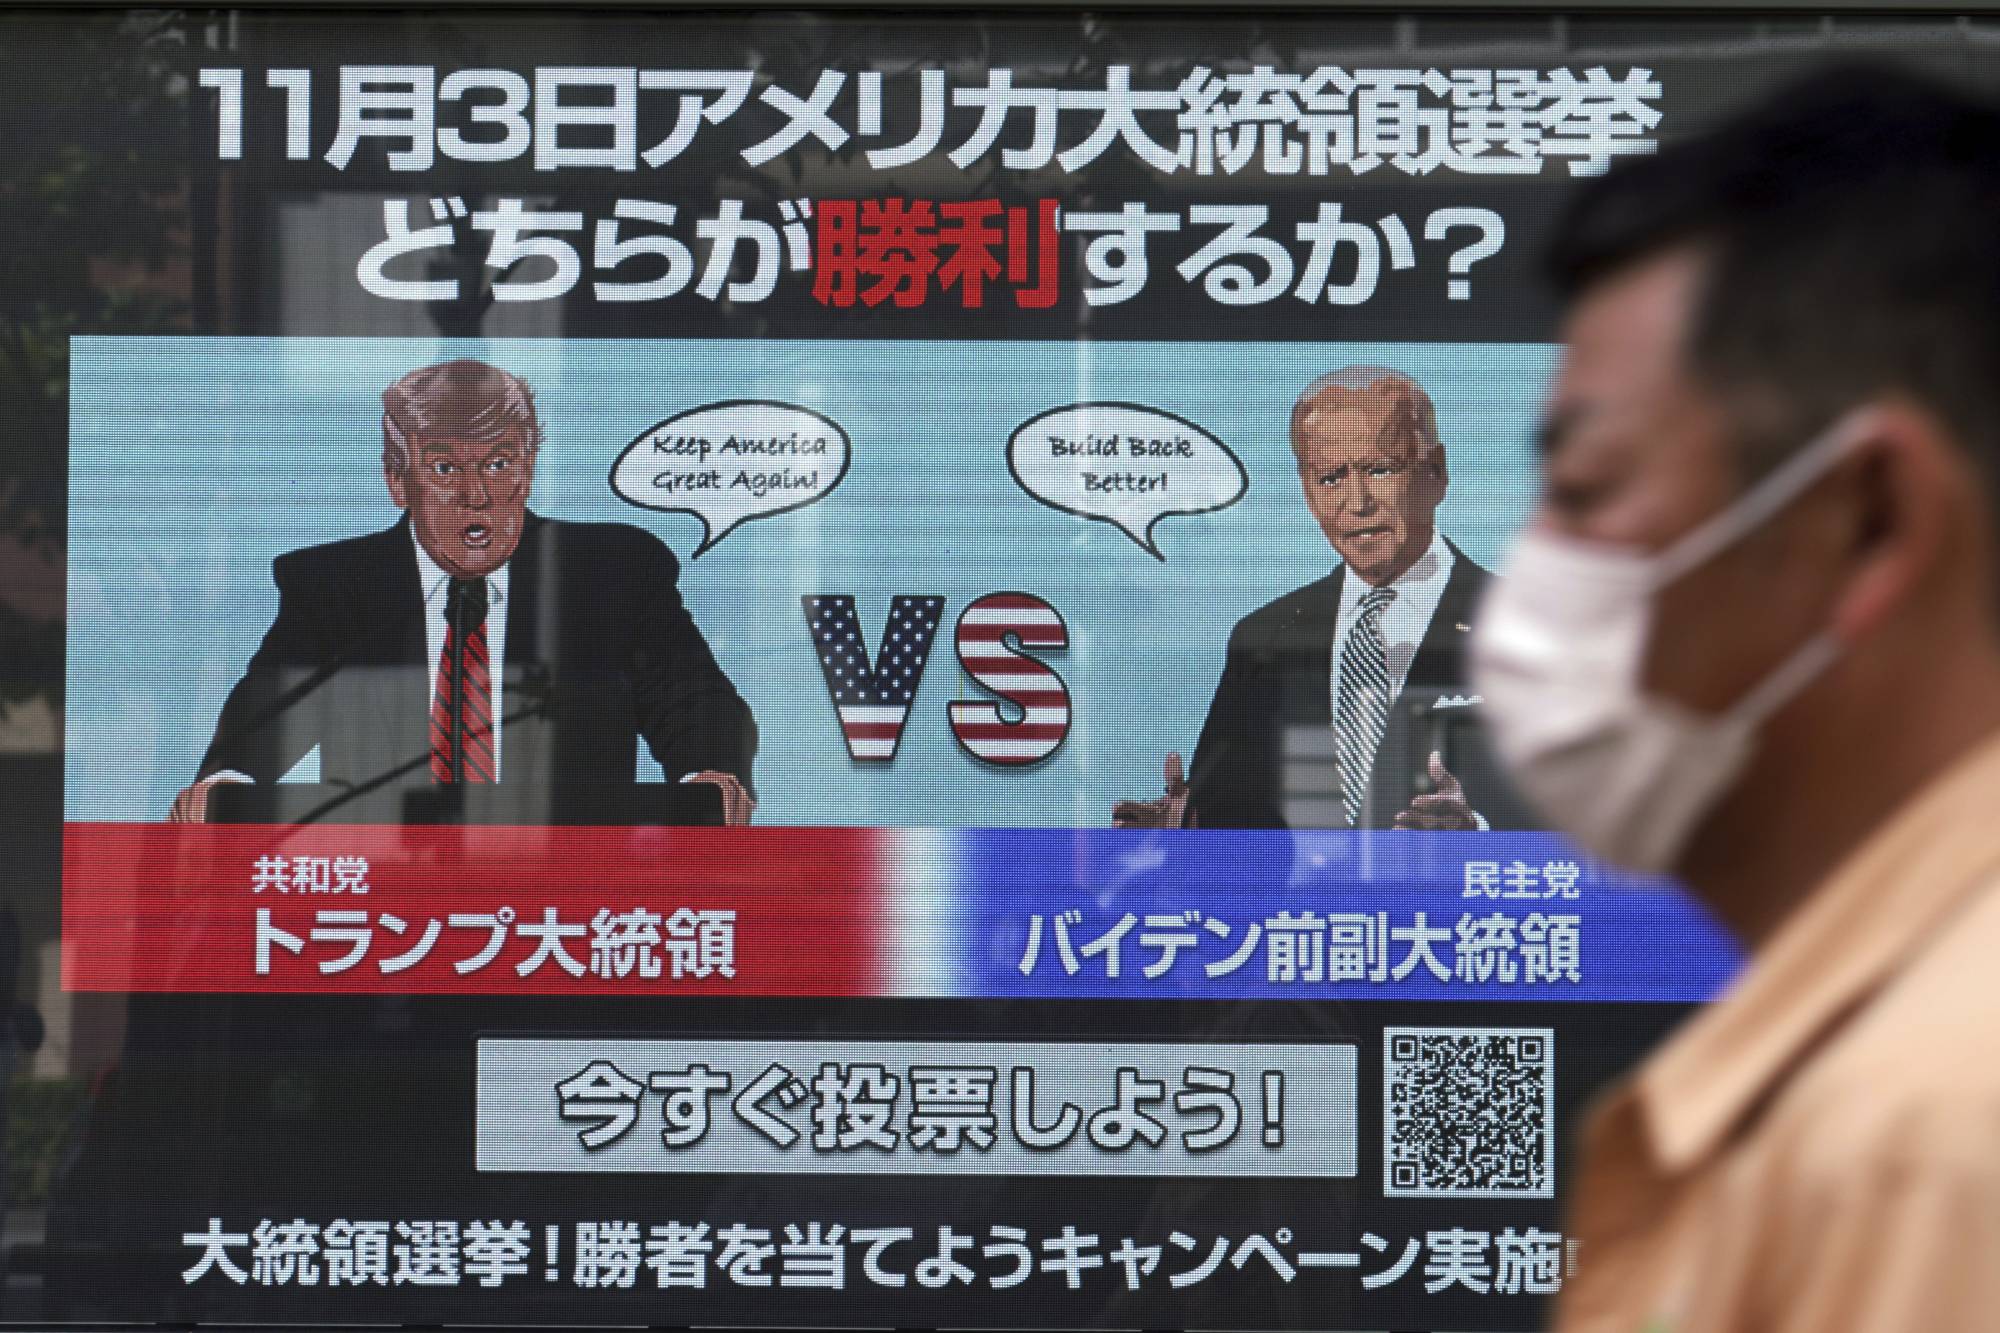 A man walks past a screen showing illustrations depicting Republican President Donald Trump and Democratic candidate and former Vice President Joe Biden for an online vote to predict the winner in the U.S. presidential election, in Tokyo on Oct. 26. | AP